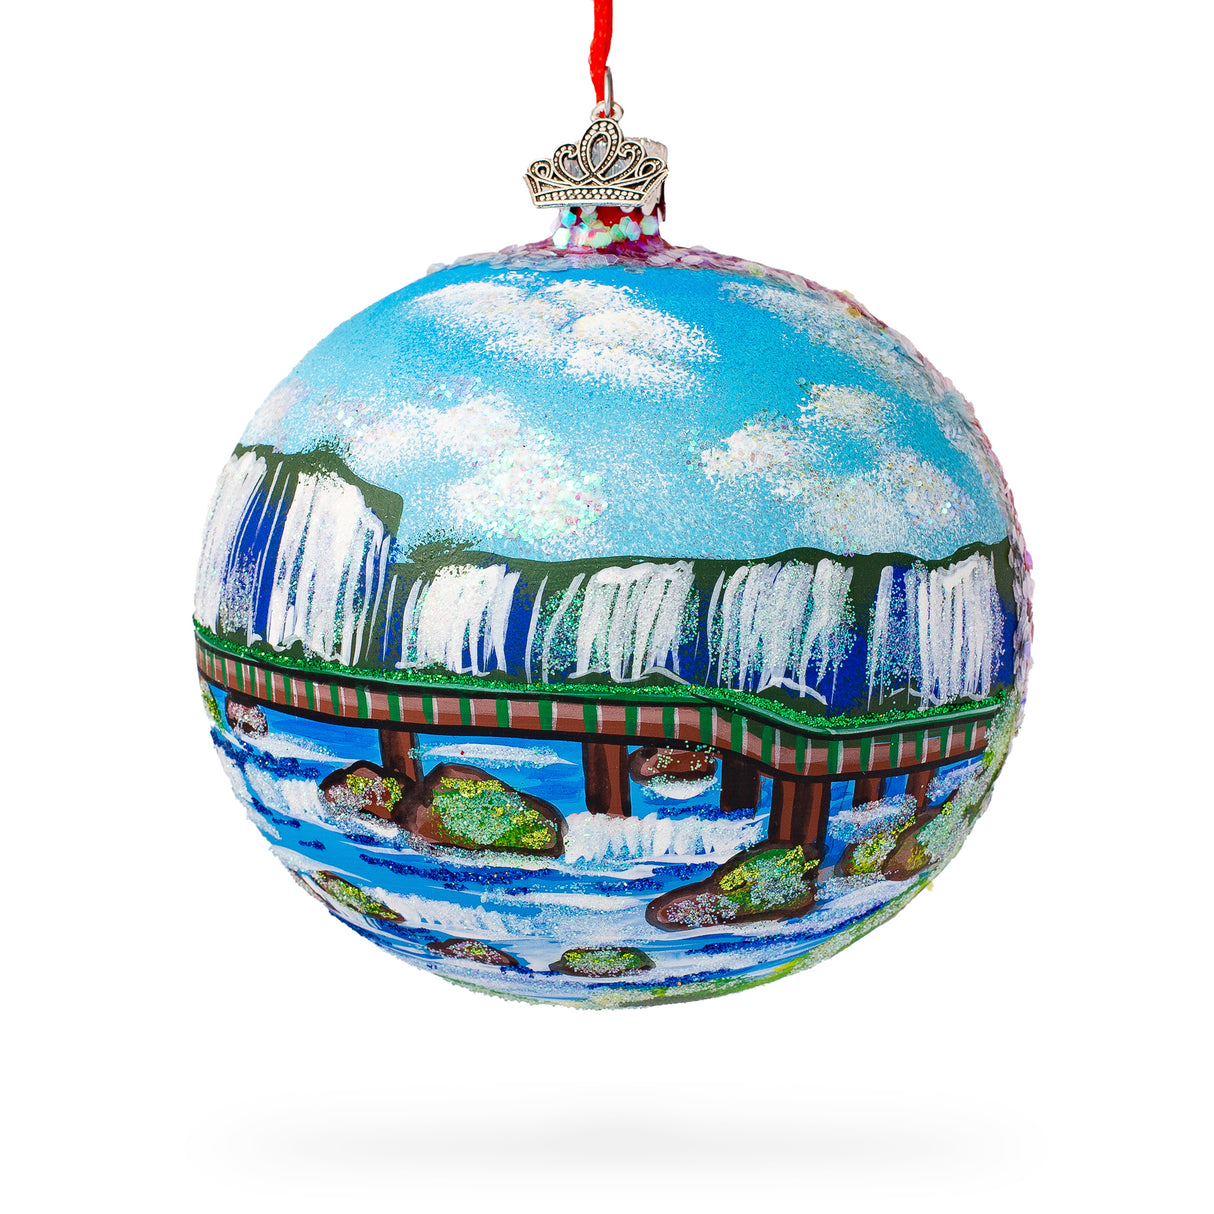 Iguazu Falls, Brazil and Argentina Glass Ball Christmas Ornament 4 Inches in Blue color, Round shape